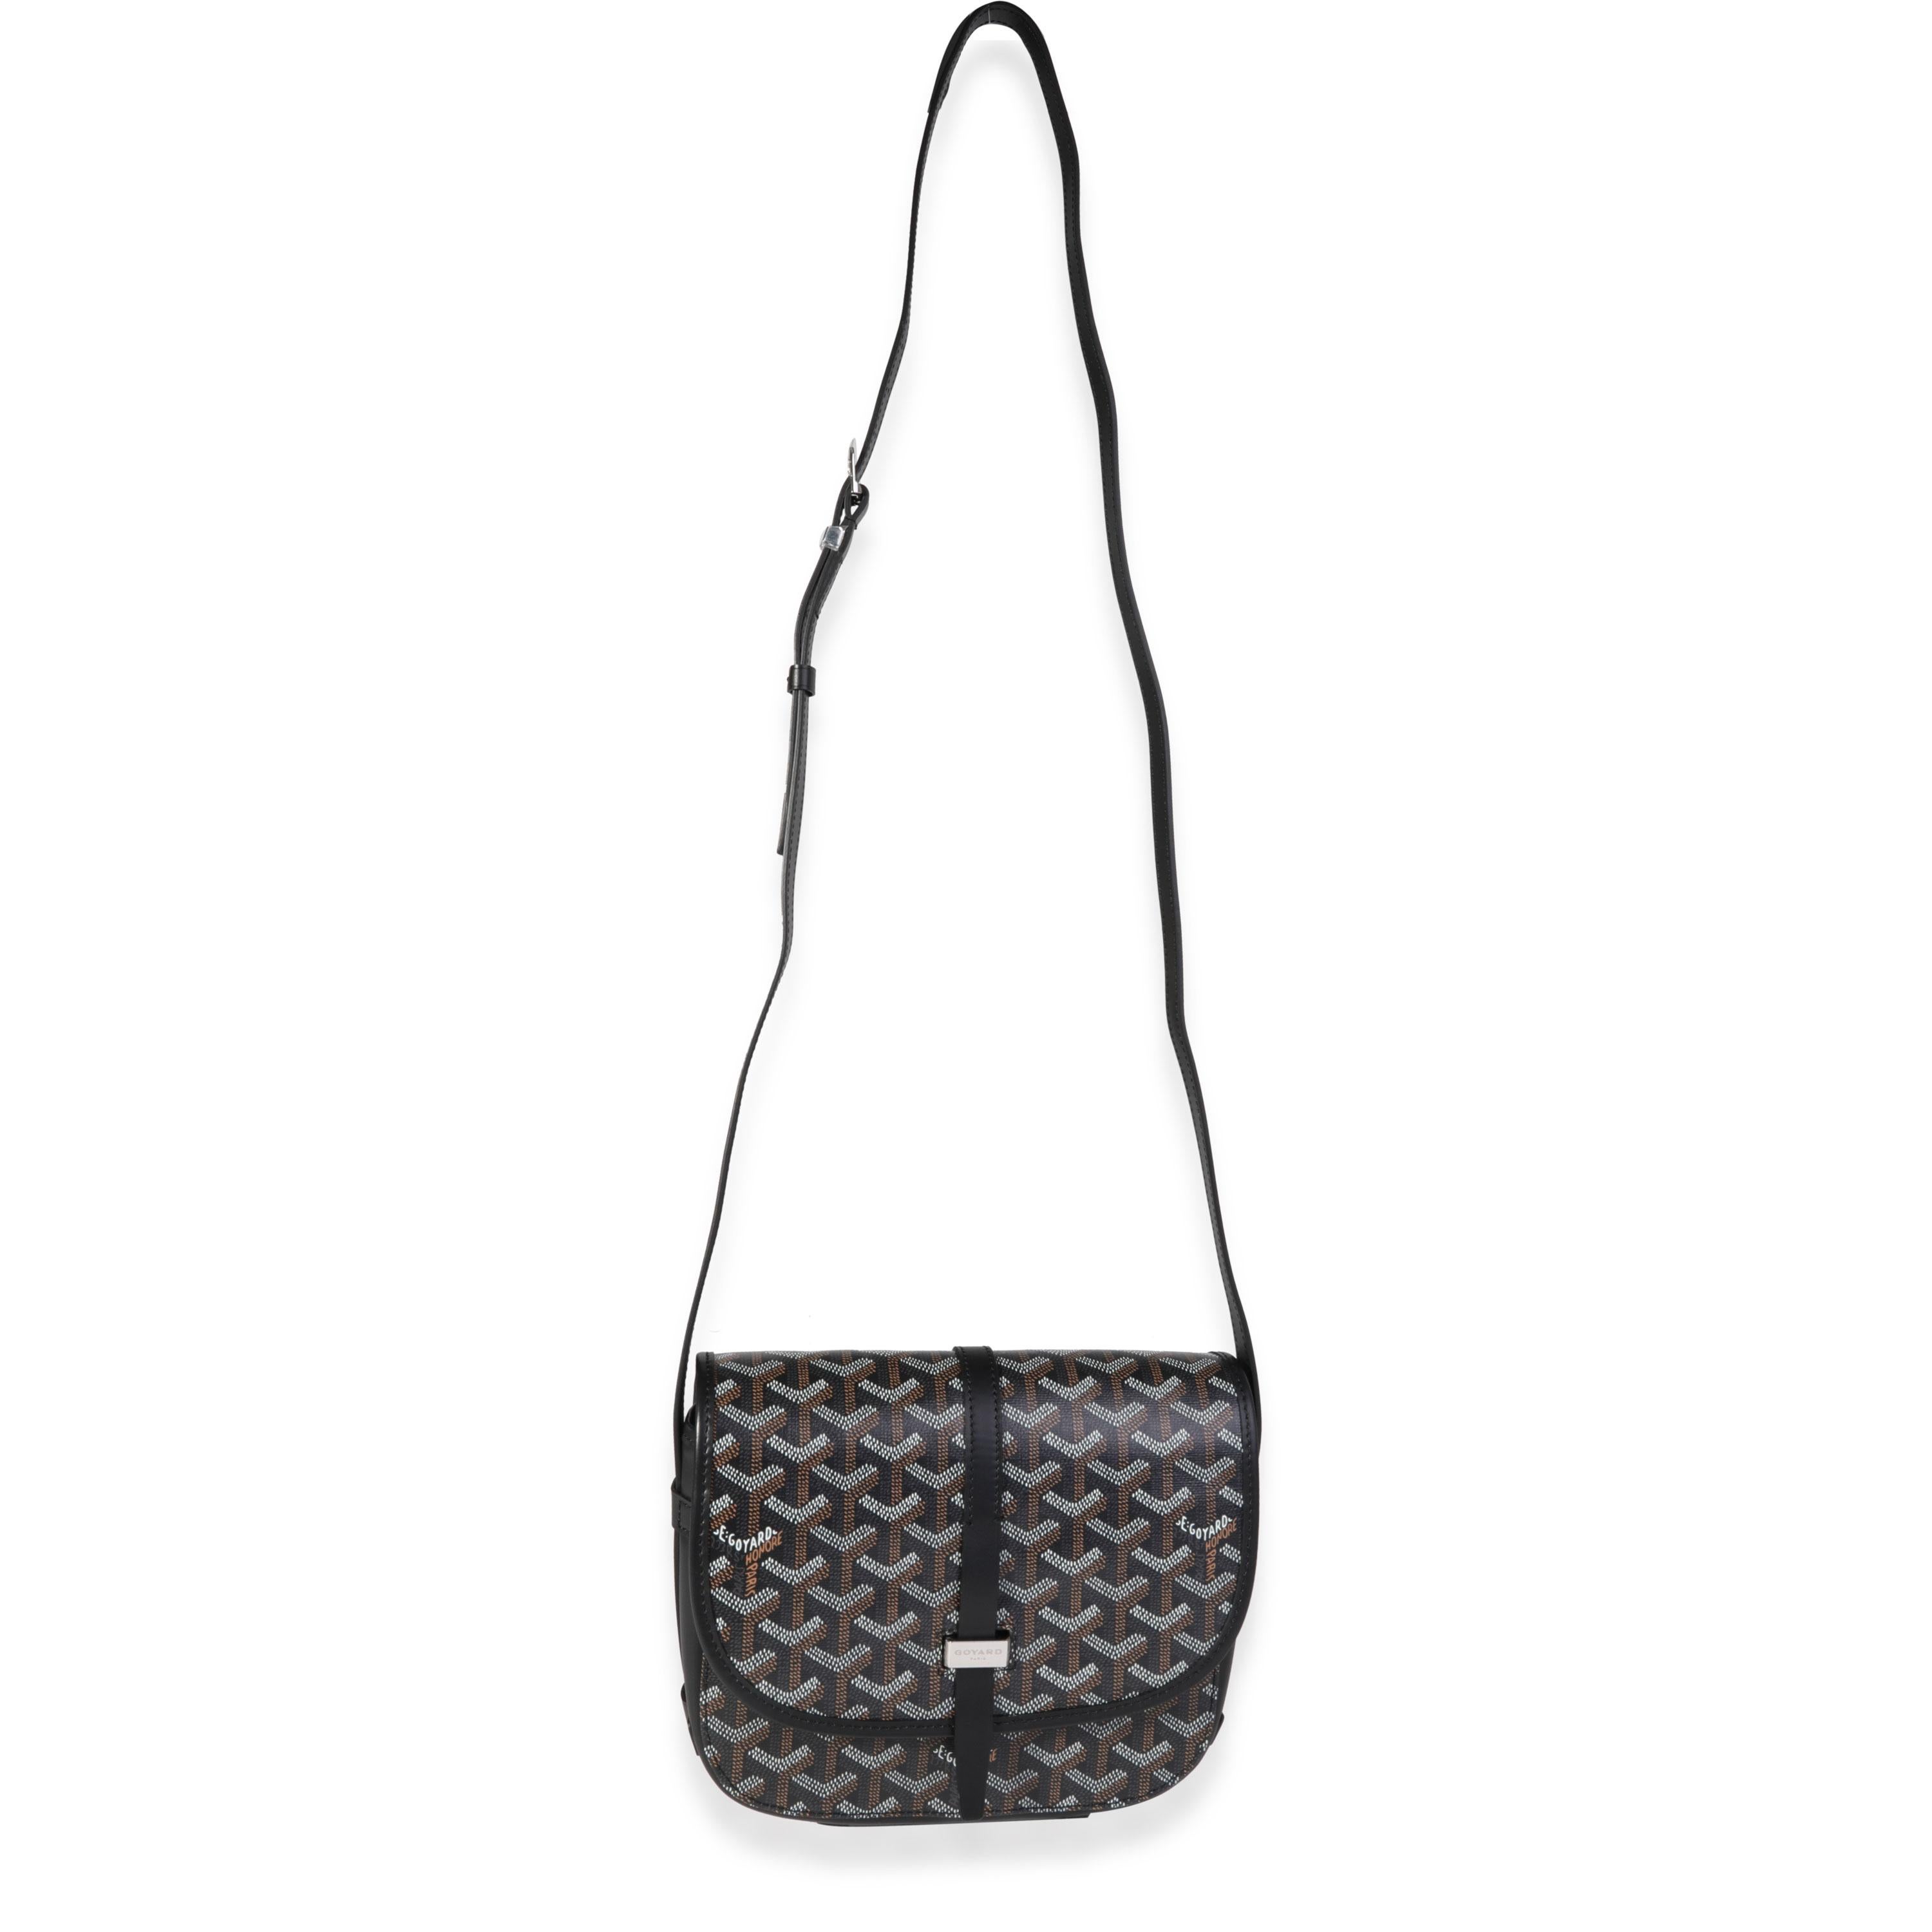 Listing Title: Goyard Black Goyardine Belvédère II PM
SKU: 121026
Condition: Pre-owned 
Handbag Condition: Very Good
Condition Comments: Very Good Condition. Some plastic to hardware. Light scuffing and creasing to inner flap. Light marks to